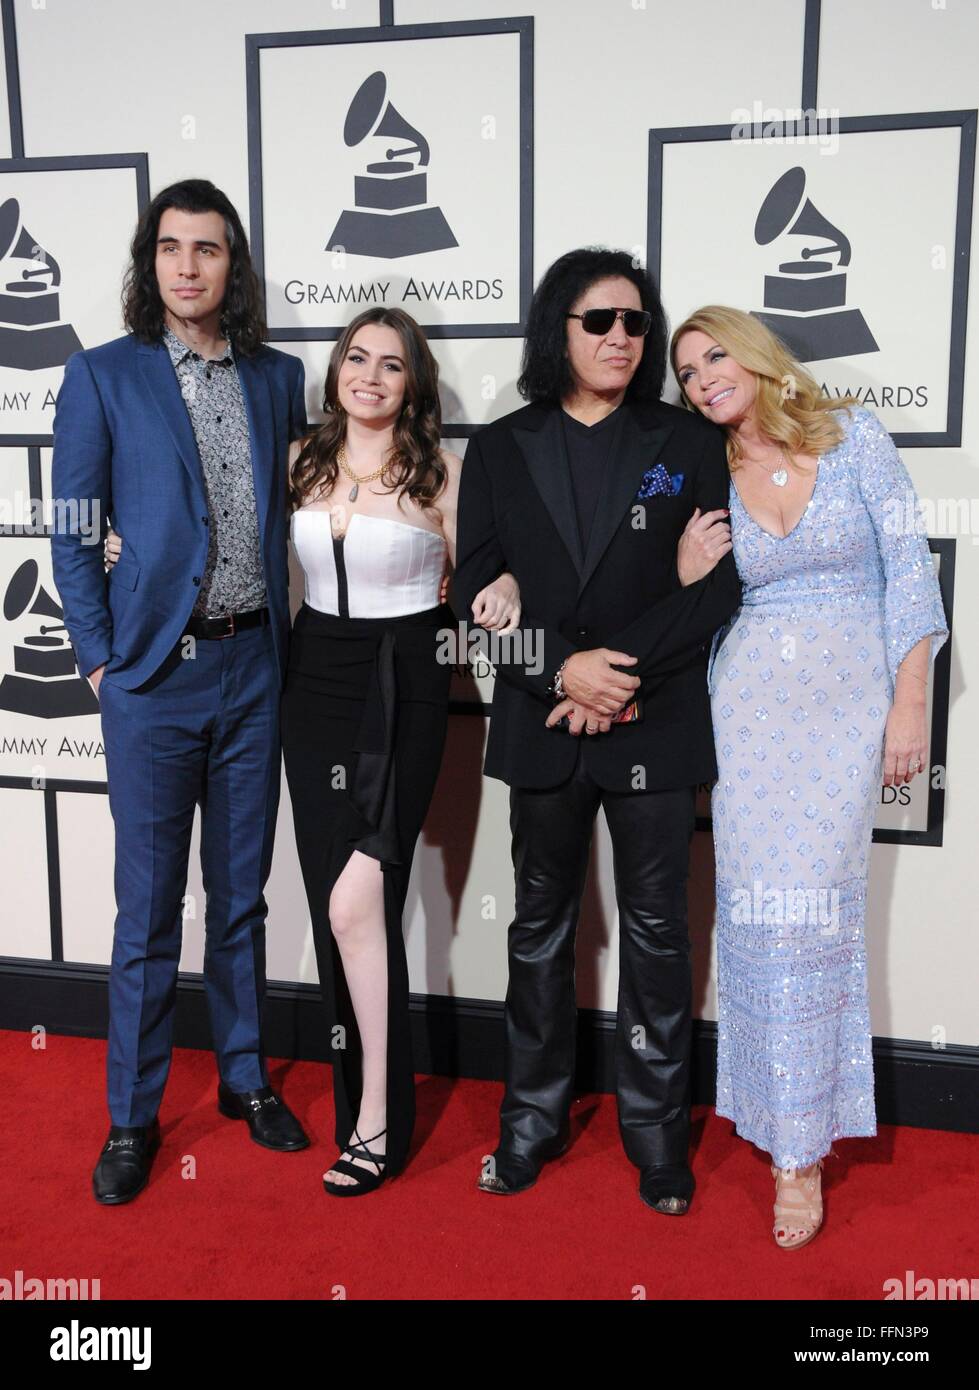 Los Angeles, CA, USA. 15th Feb, 2016. Gene Simmons, Shannon Tweed, Nick Simmons, Sophie Simmons at arrivals for 58th Annual Grammy Awards 2016 - GRAMMYS 1, Staples Center, Los Angeles, CA February 15, 2016. Credit:  Charlie Williams/Everett Collection/Alamy Live News Stock Photo